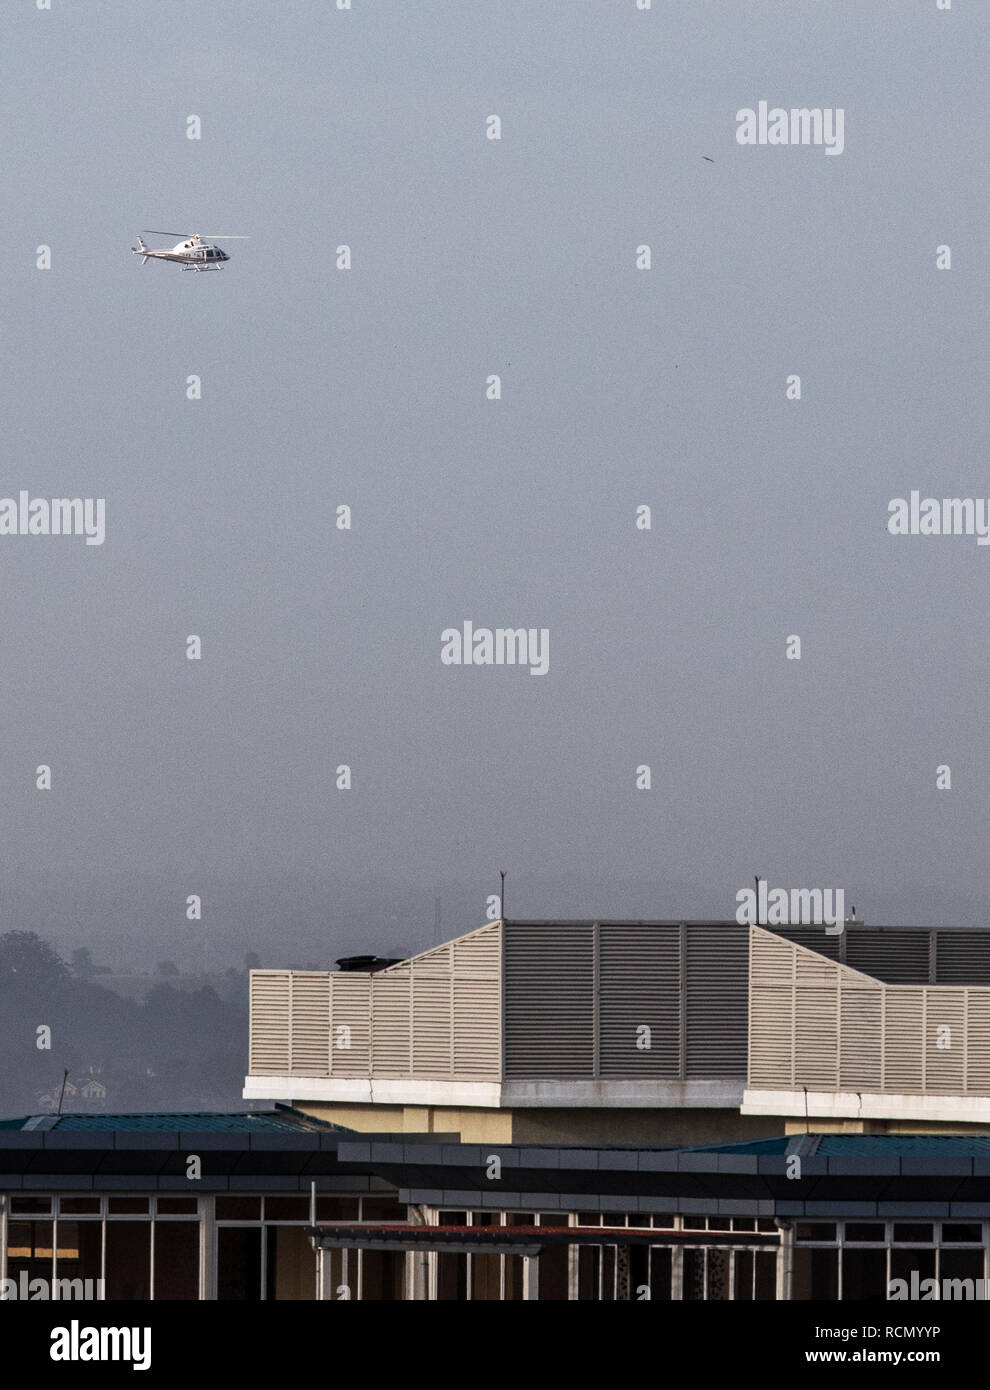 Nairobi, Kenya. 15th Jan, 2019. A helicopter hovers near the site of an attack at an upmarket hotel and office complex in Nairobi, Kenya, on Jan. 15, 2019. At least three people have been confirmed dead and several others injured following an attack at an upmarket hotel and office complex in Nairobi on Tuesday, police said. Credit: Zhang Yu/Xinhua/Alamy Live News Stock Photo